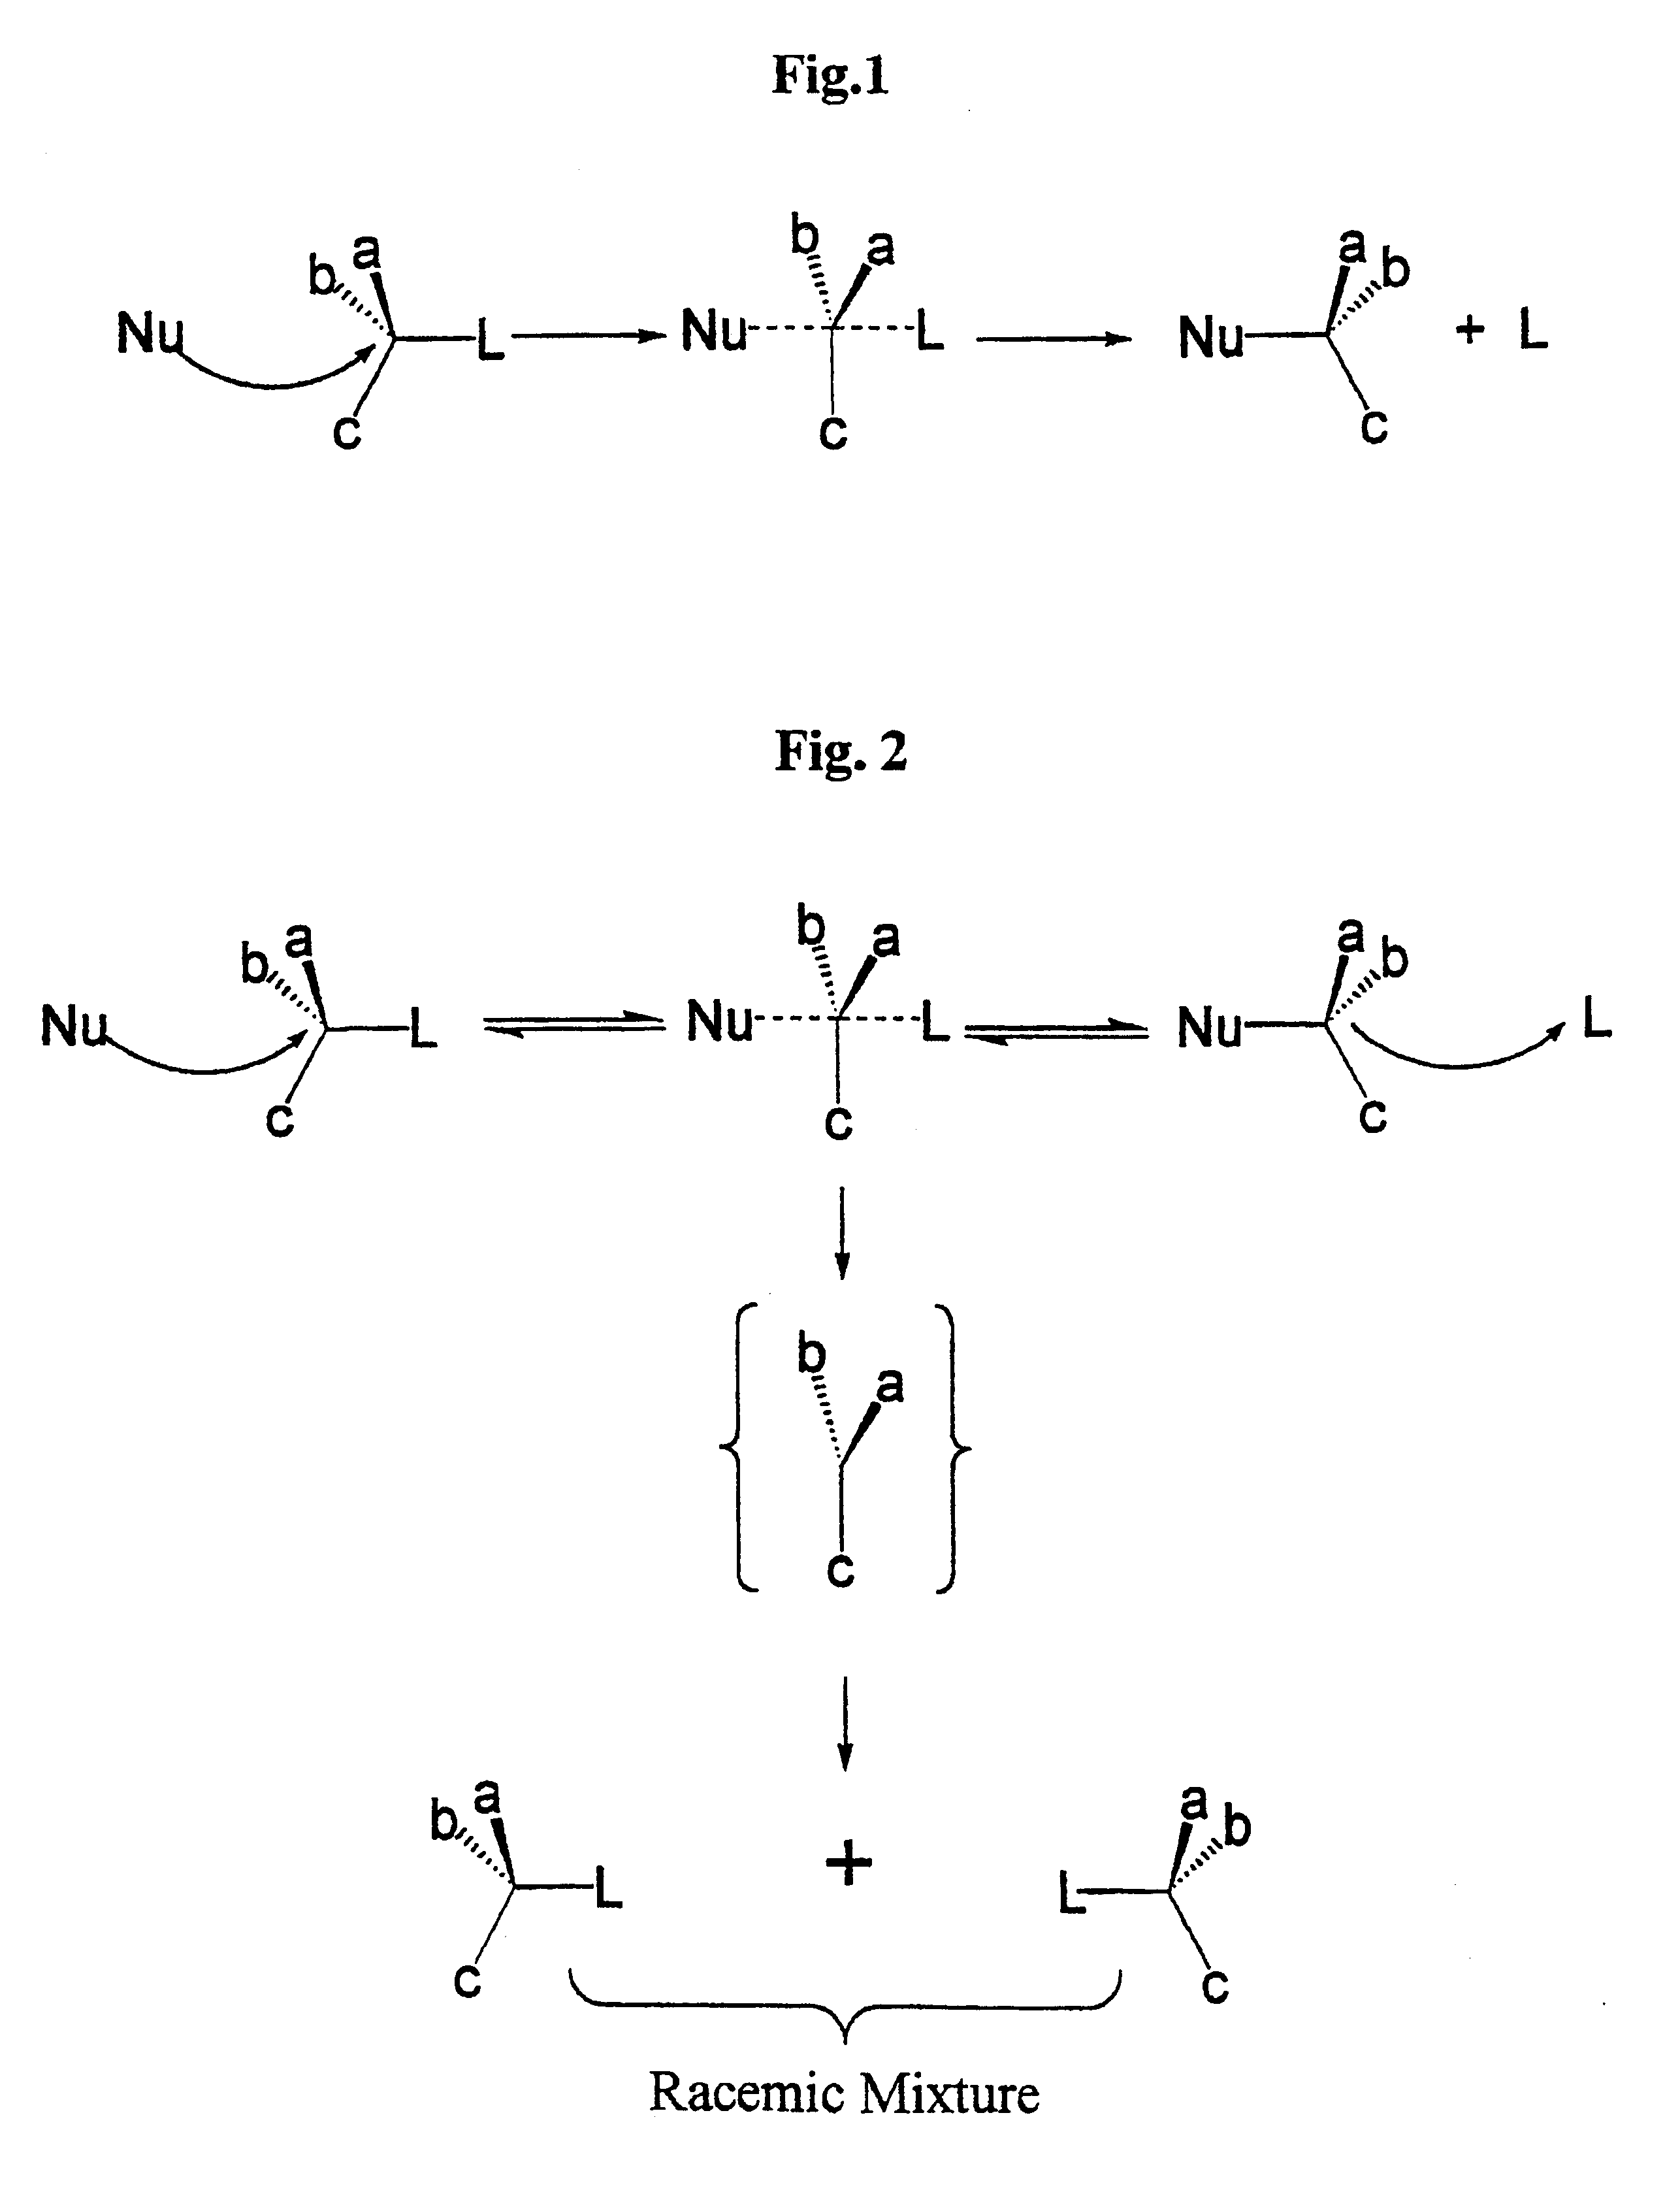 Conversion of a hydroxy group in certain alcohols into a fluorosulfonate ester or a trifluoromethylsulfonate ester